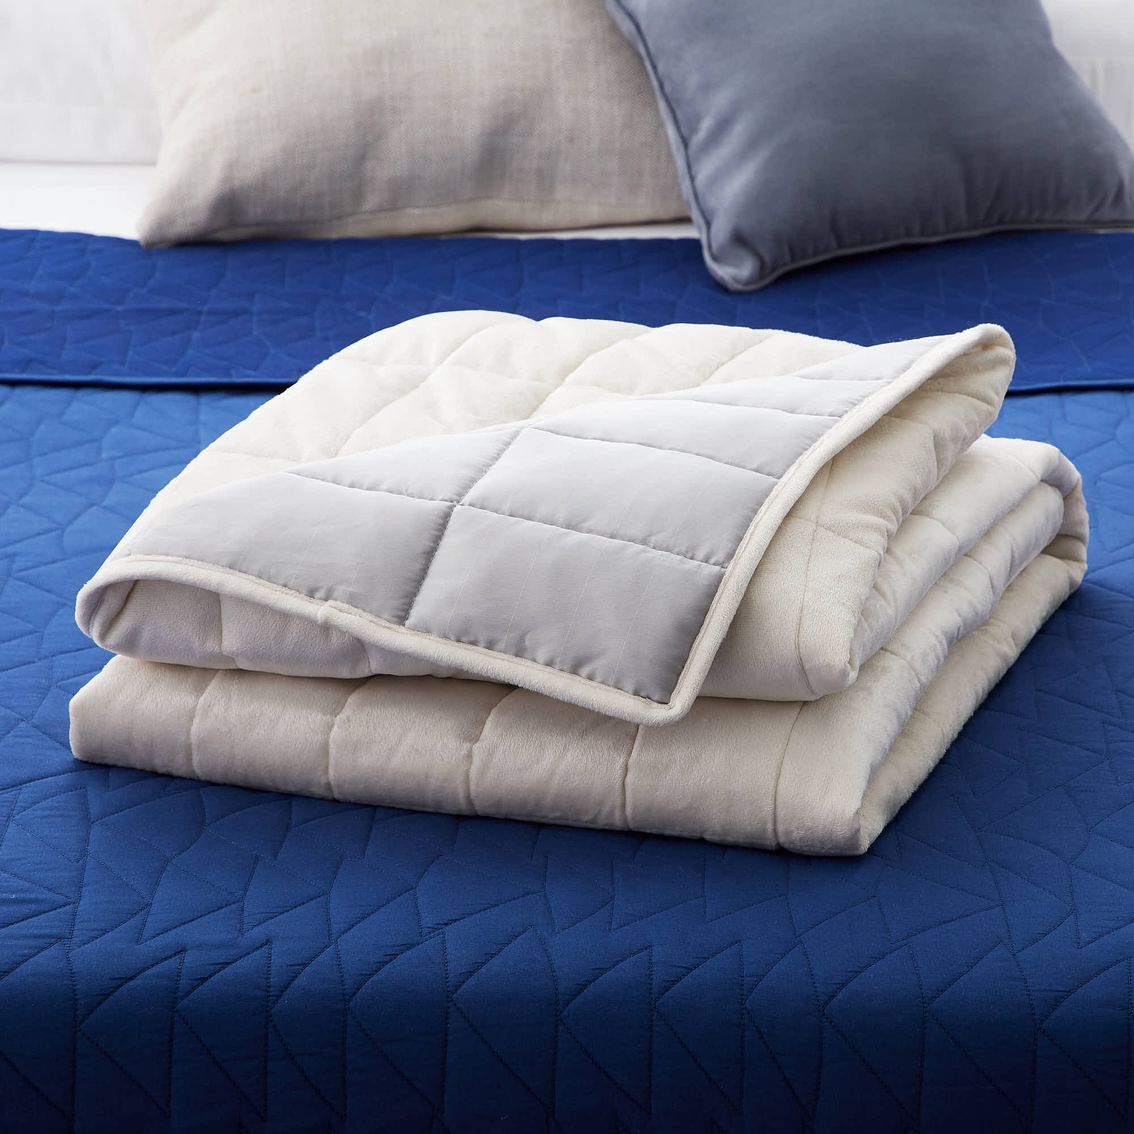 Dr Oz Good Life Tencel Silver Weighted Blanket - Image 4 of 5